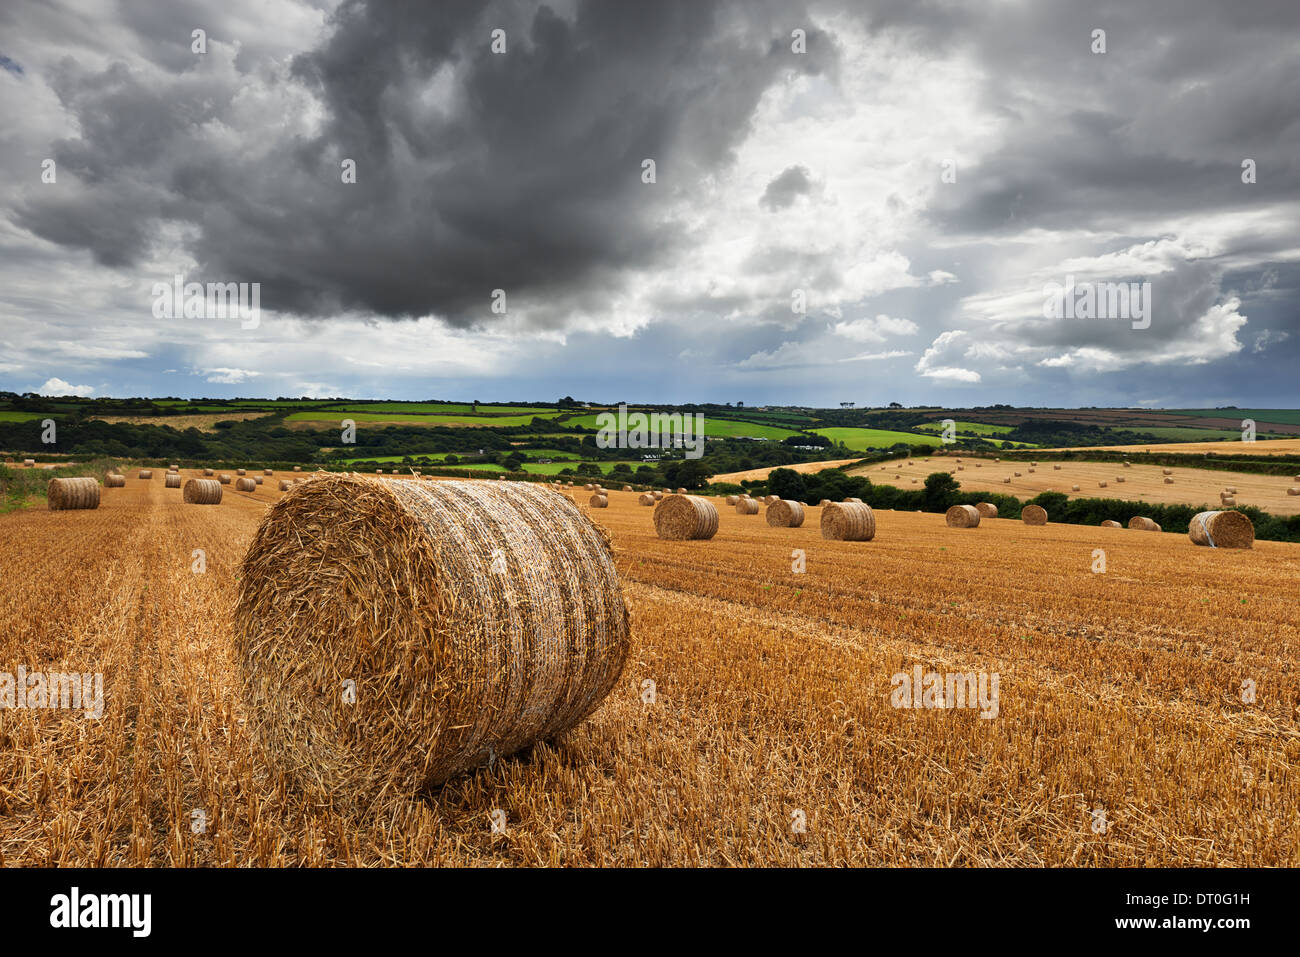 A field of hay bales located in the Cornish countryside under a stormy sky Stock Photo